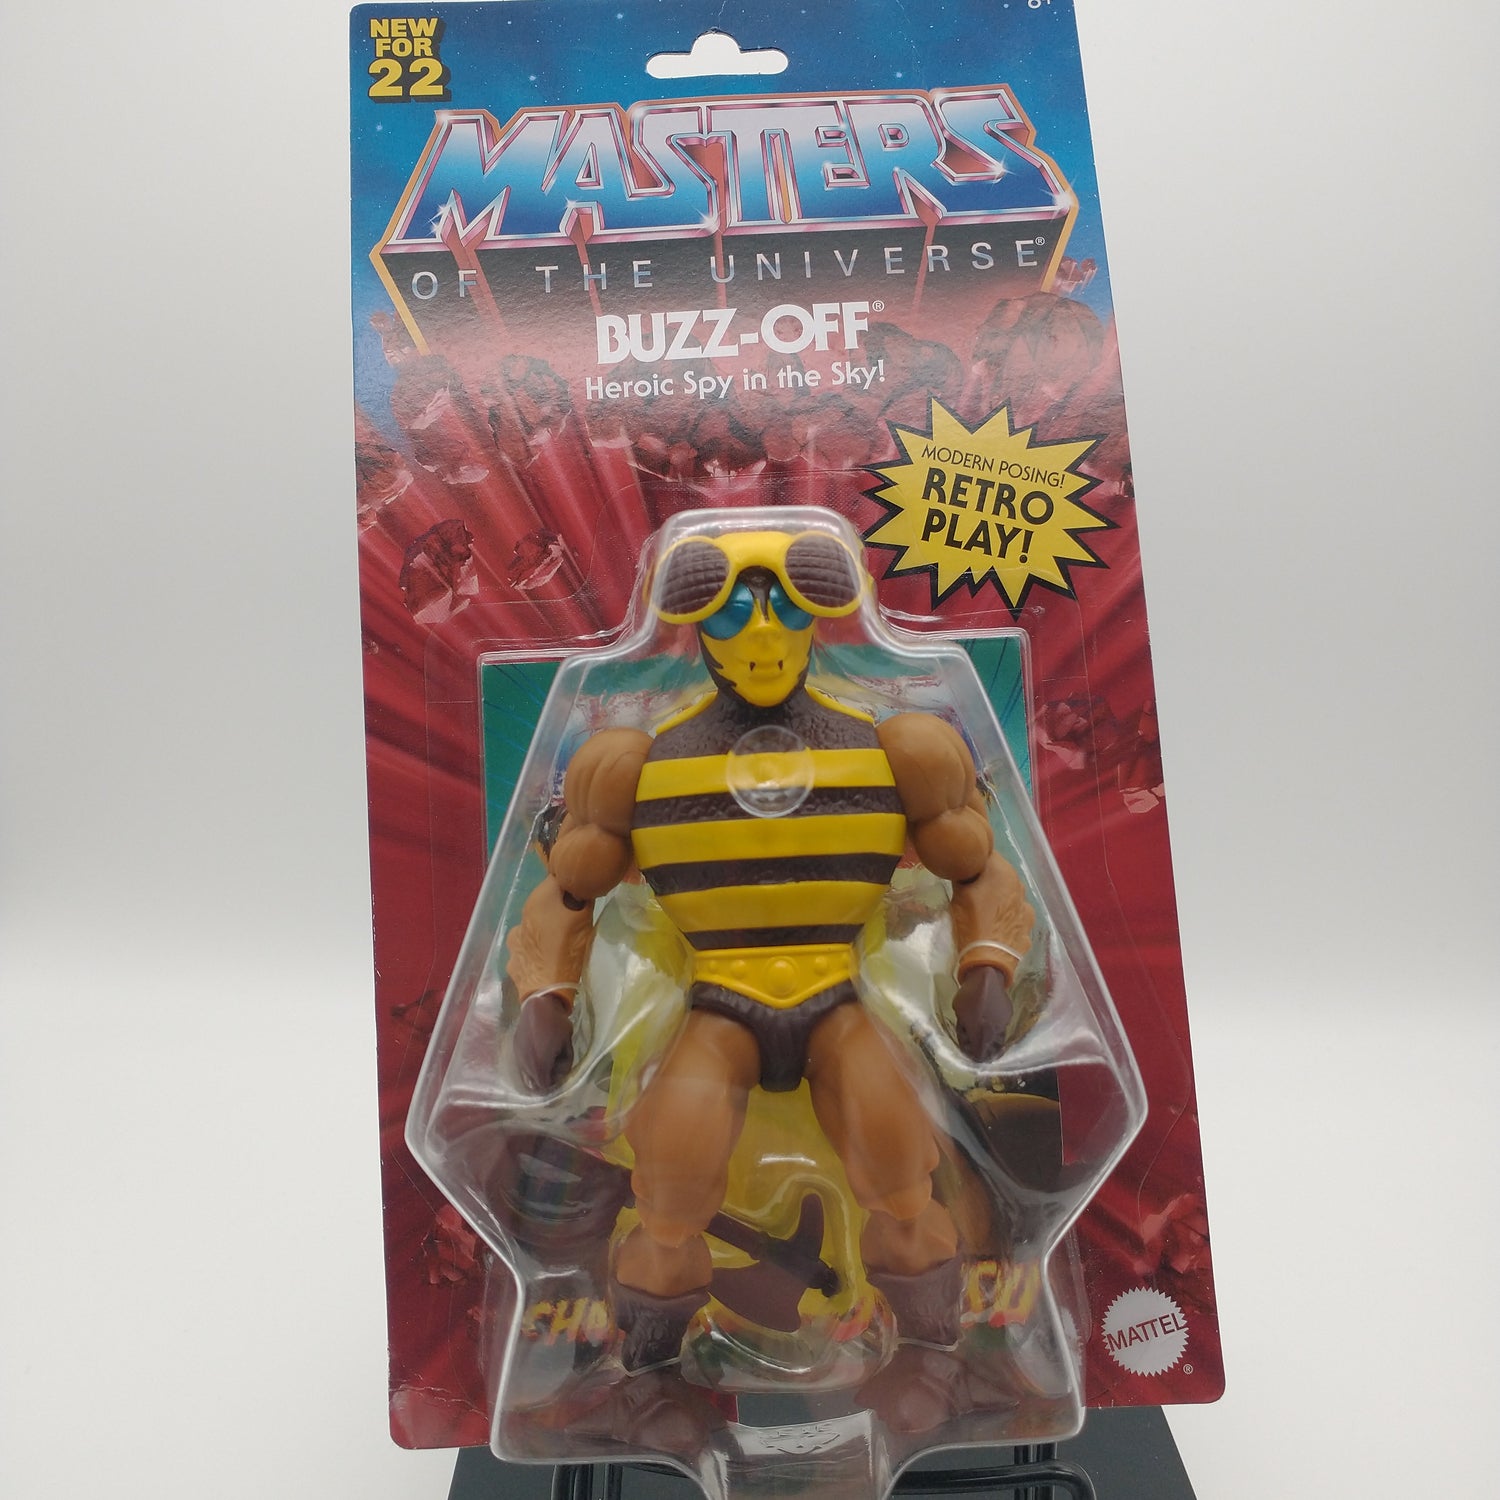 The front of the box and bubble. The bubble is sealed, the action figure inside is a humanoid with tand arms and legs wearing a black and yellow striped leotard, a yellow mask with green eyes, and a helmet with two brown spots.